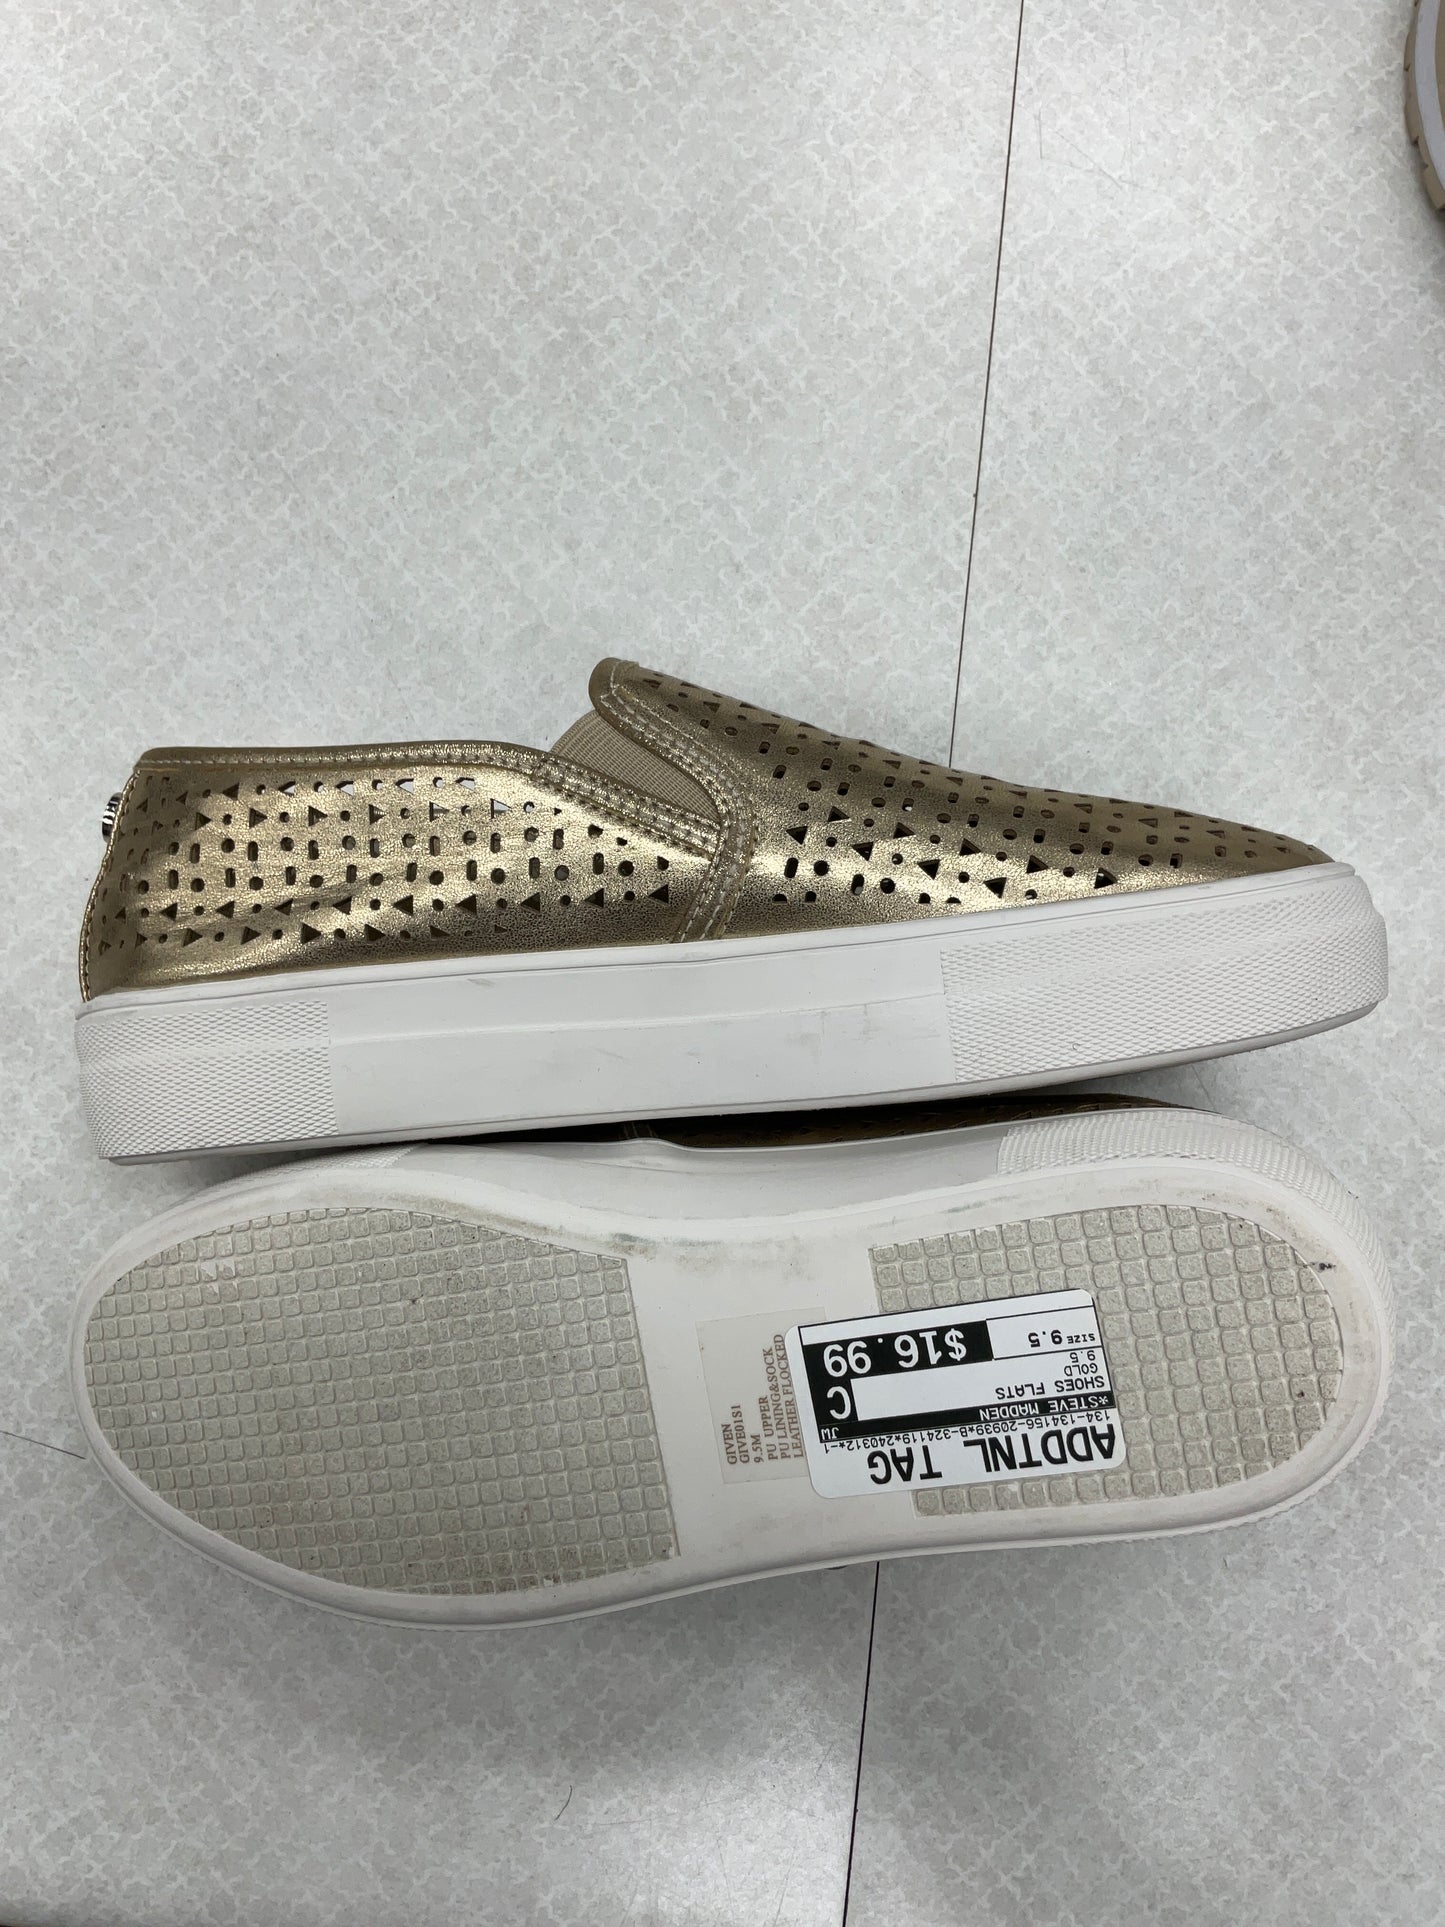 Shoes Flats By Steve Madden  Size: 9.5